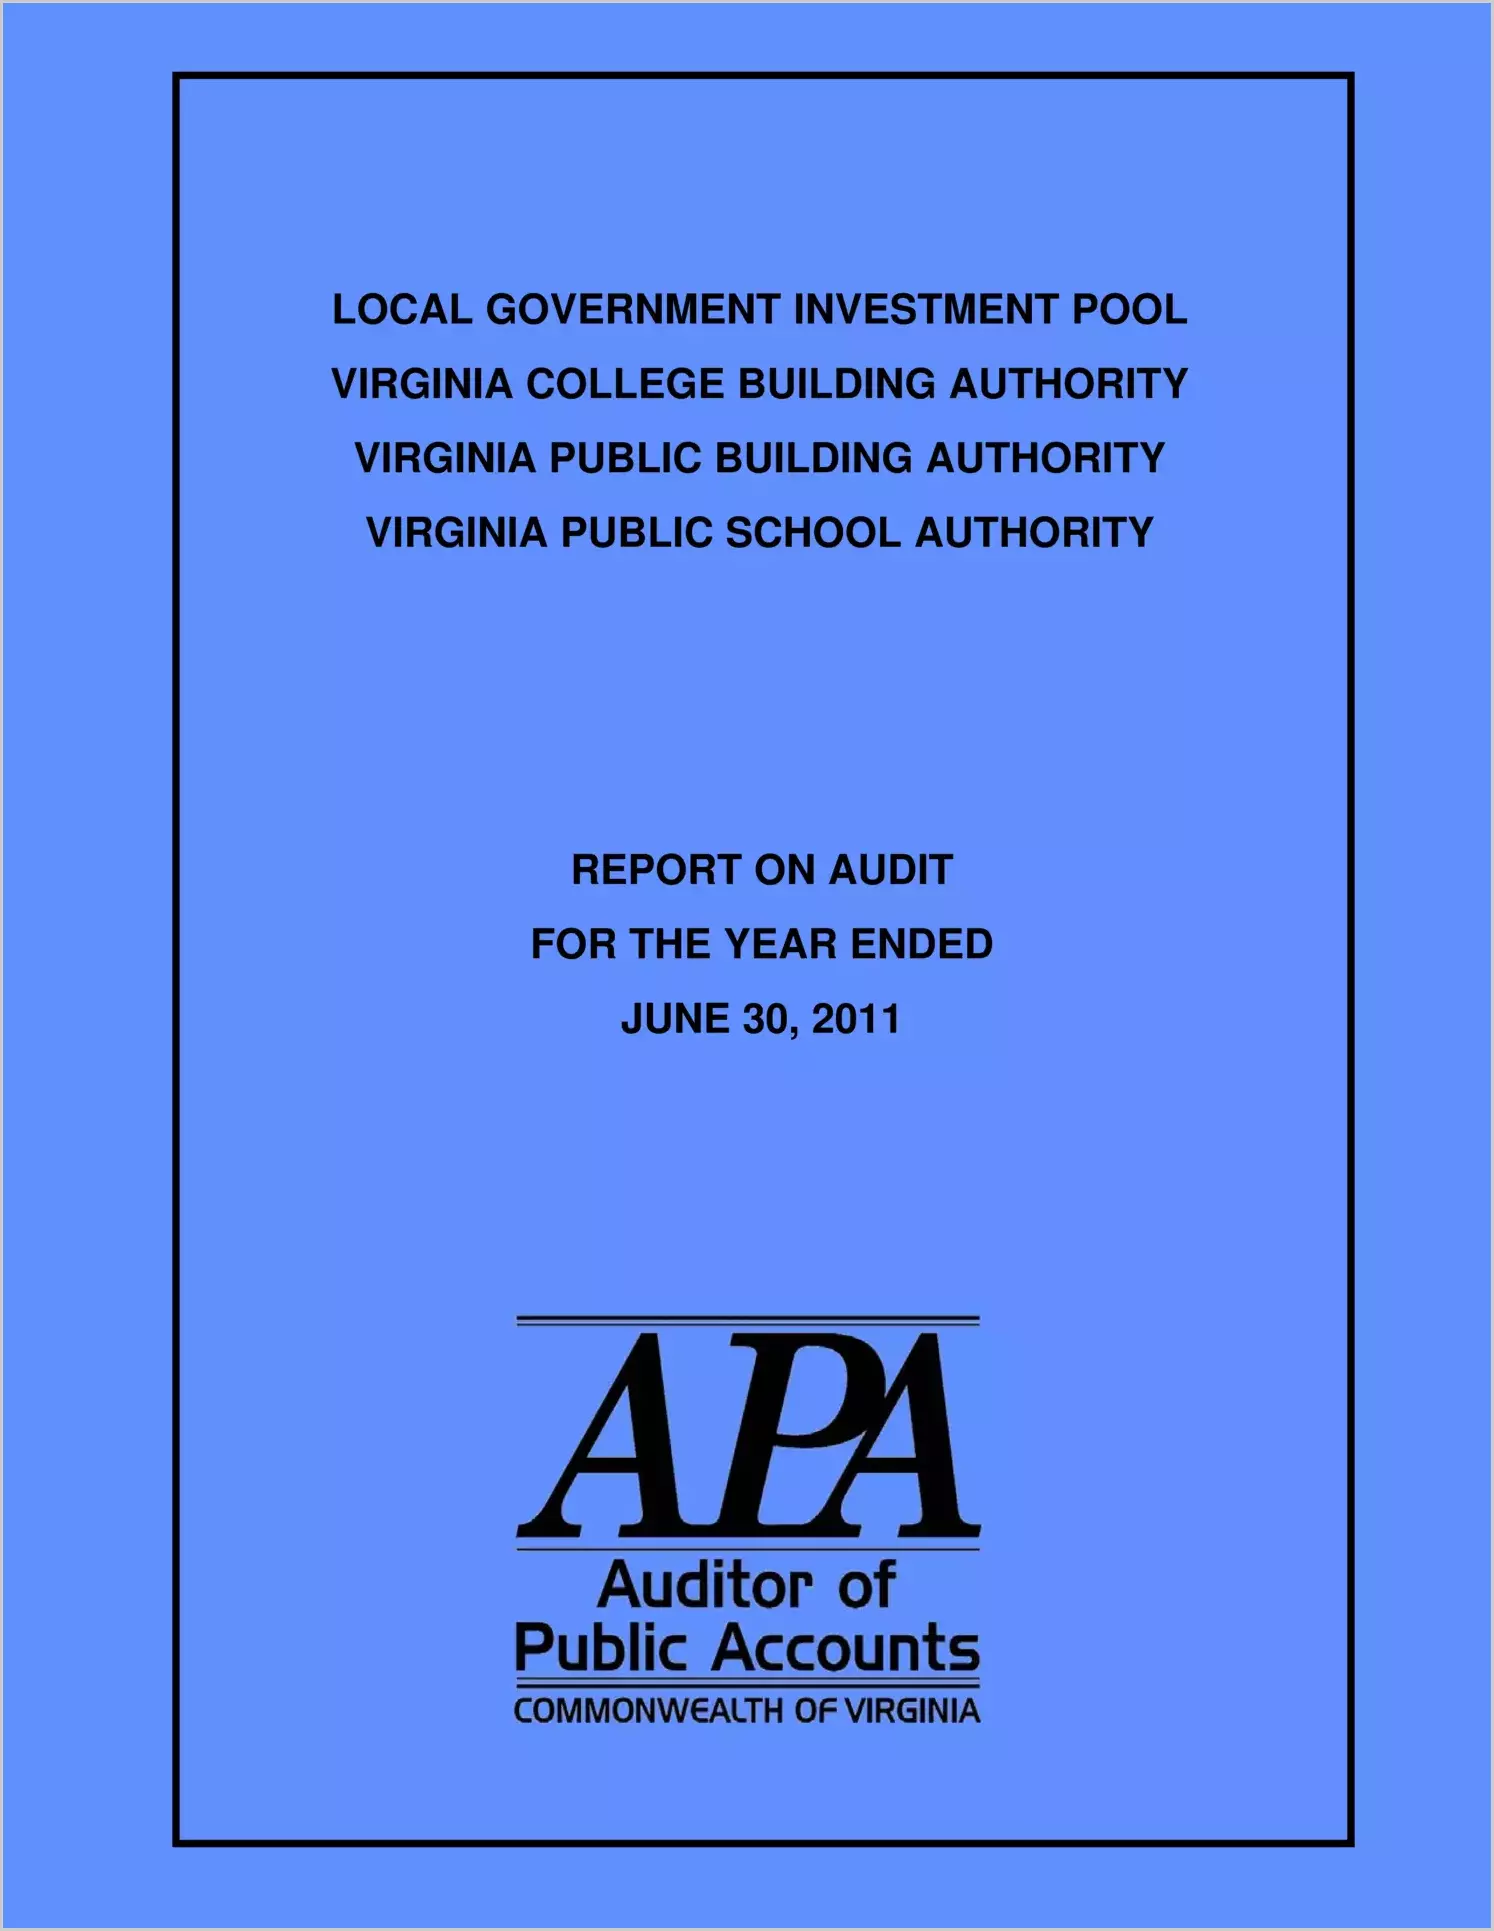 Local Government Investment Pool, Virginia College Building Authority, Virginia Public Building Authority, Virginia Public School Authority Report on Audit for Period Ended June 30, 2011